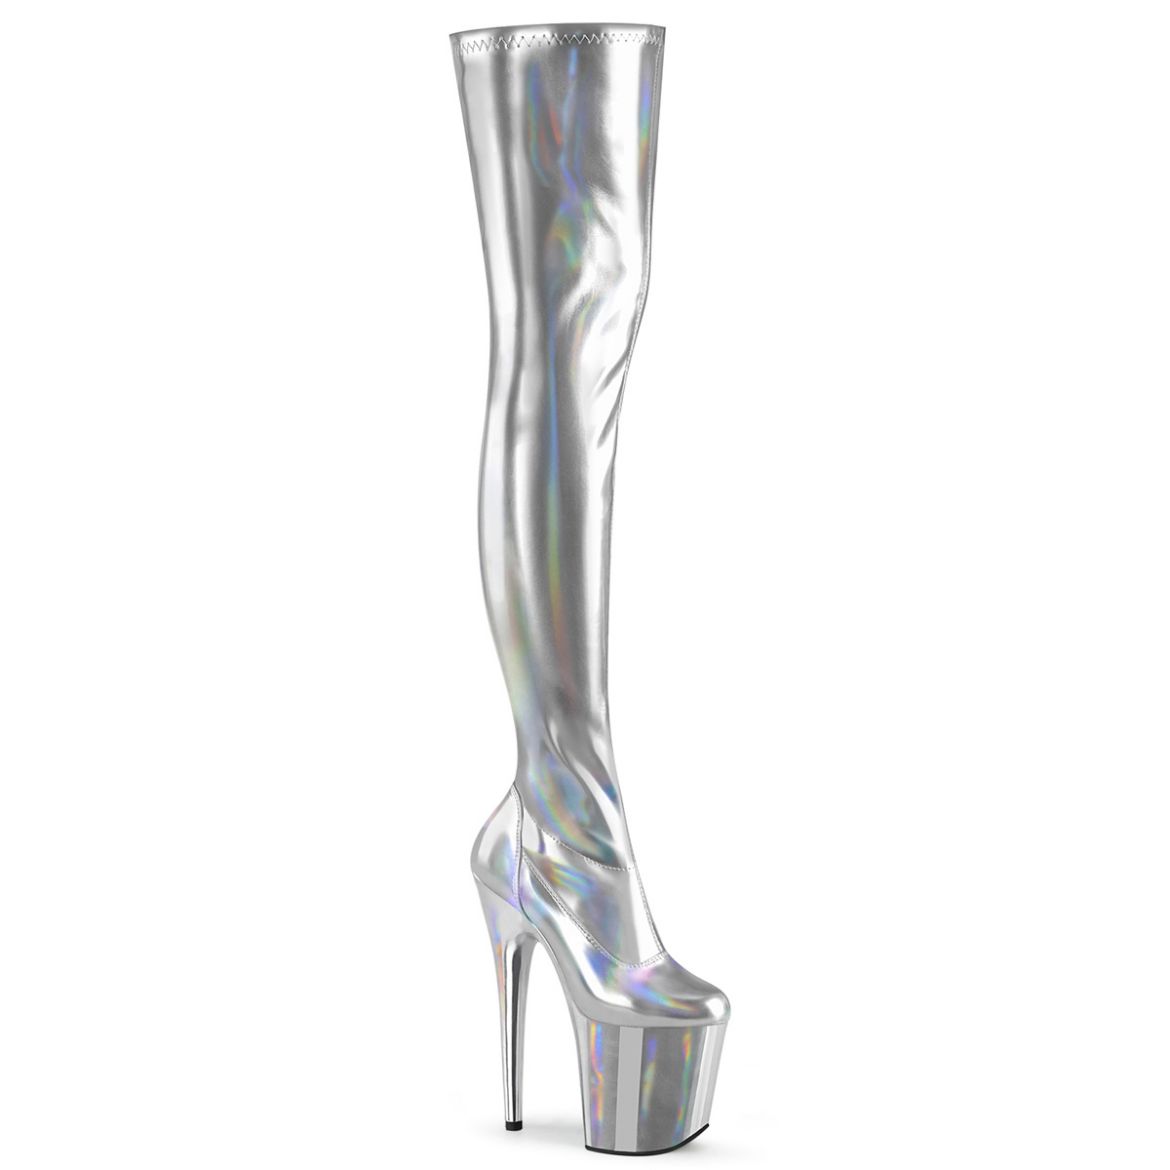 Product image of Pleaser FLAMINGO-3000HWR Slv Str. Holo/Slv Holo 8 Inch Heel 4 Inch PF Stretch Thigh Boot Side Zip